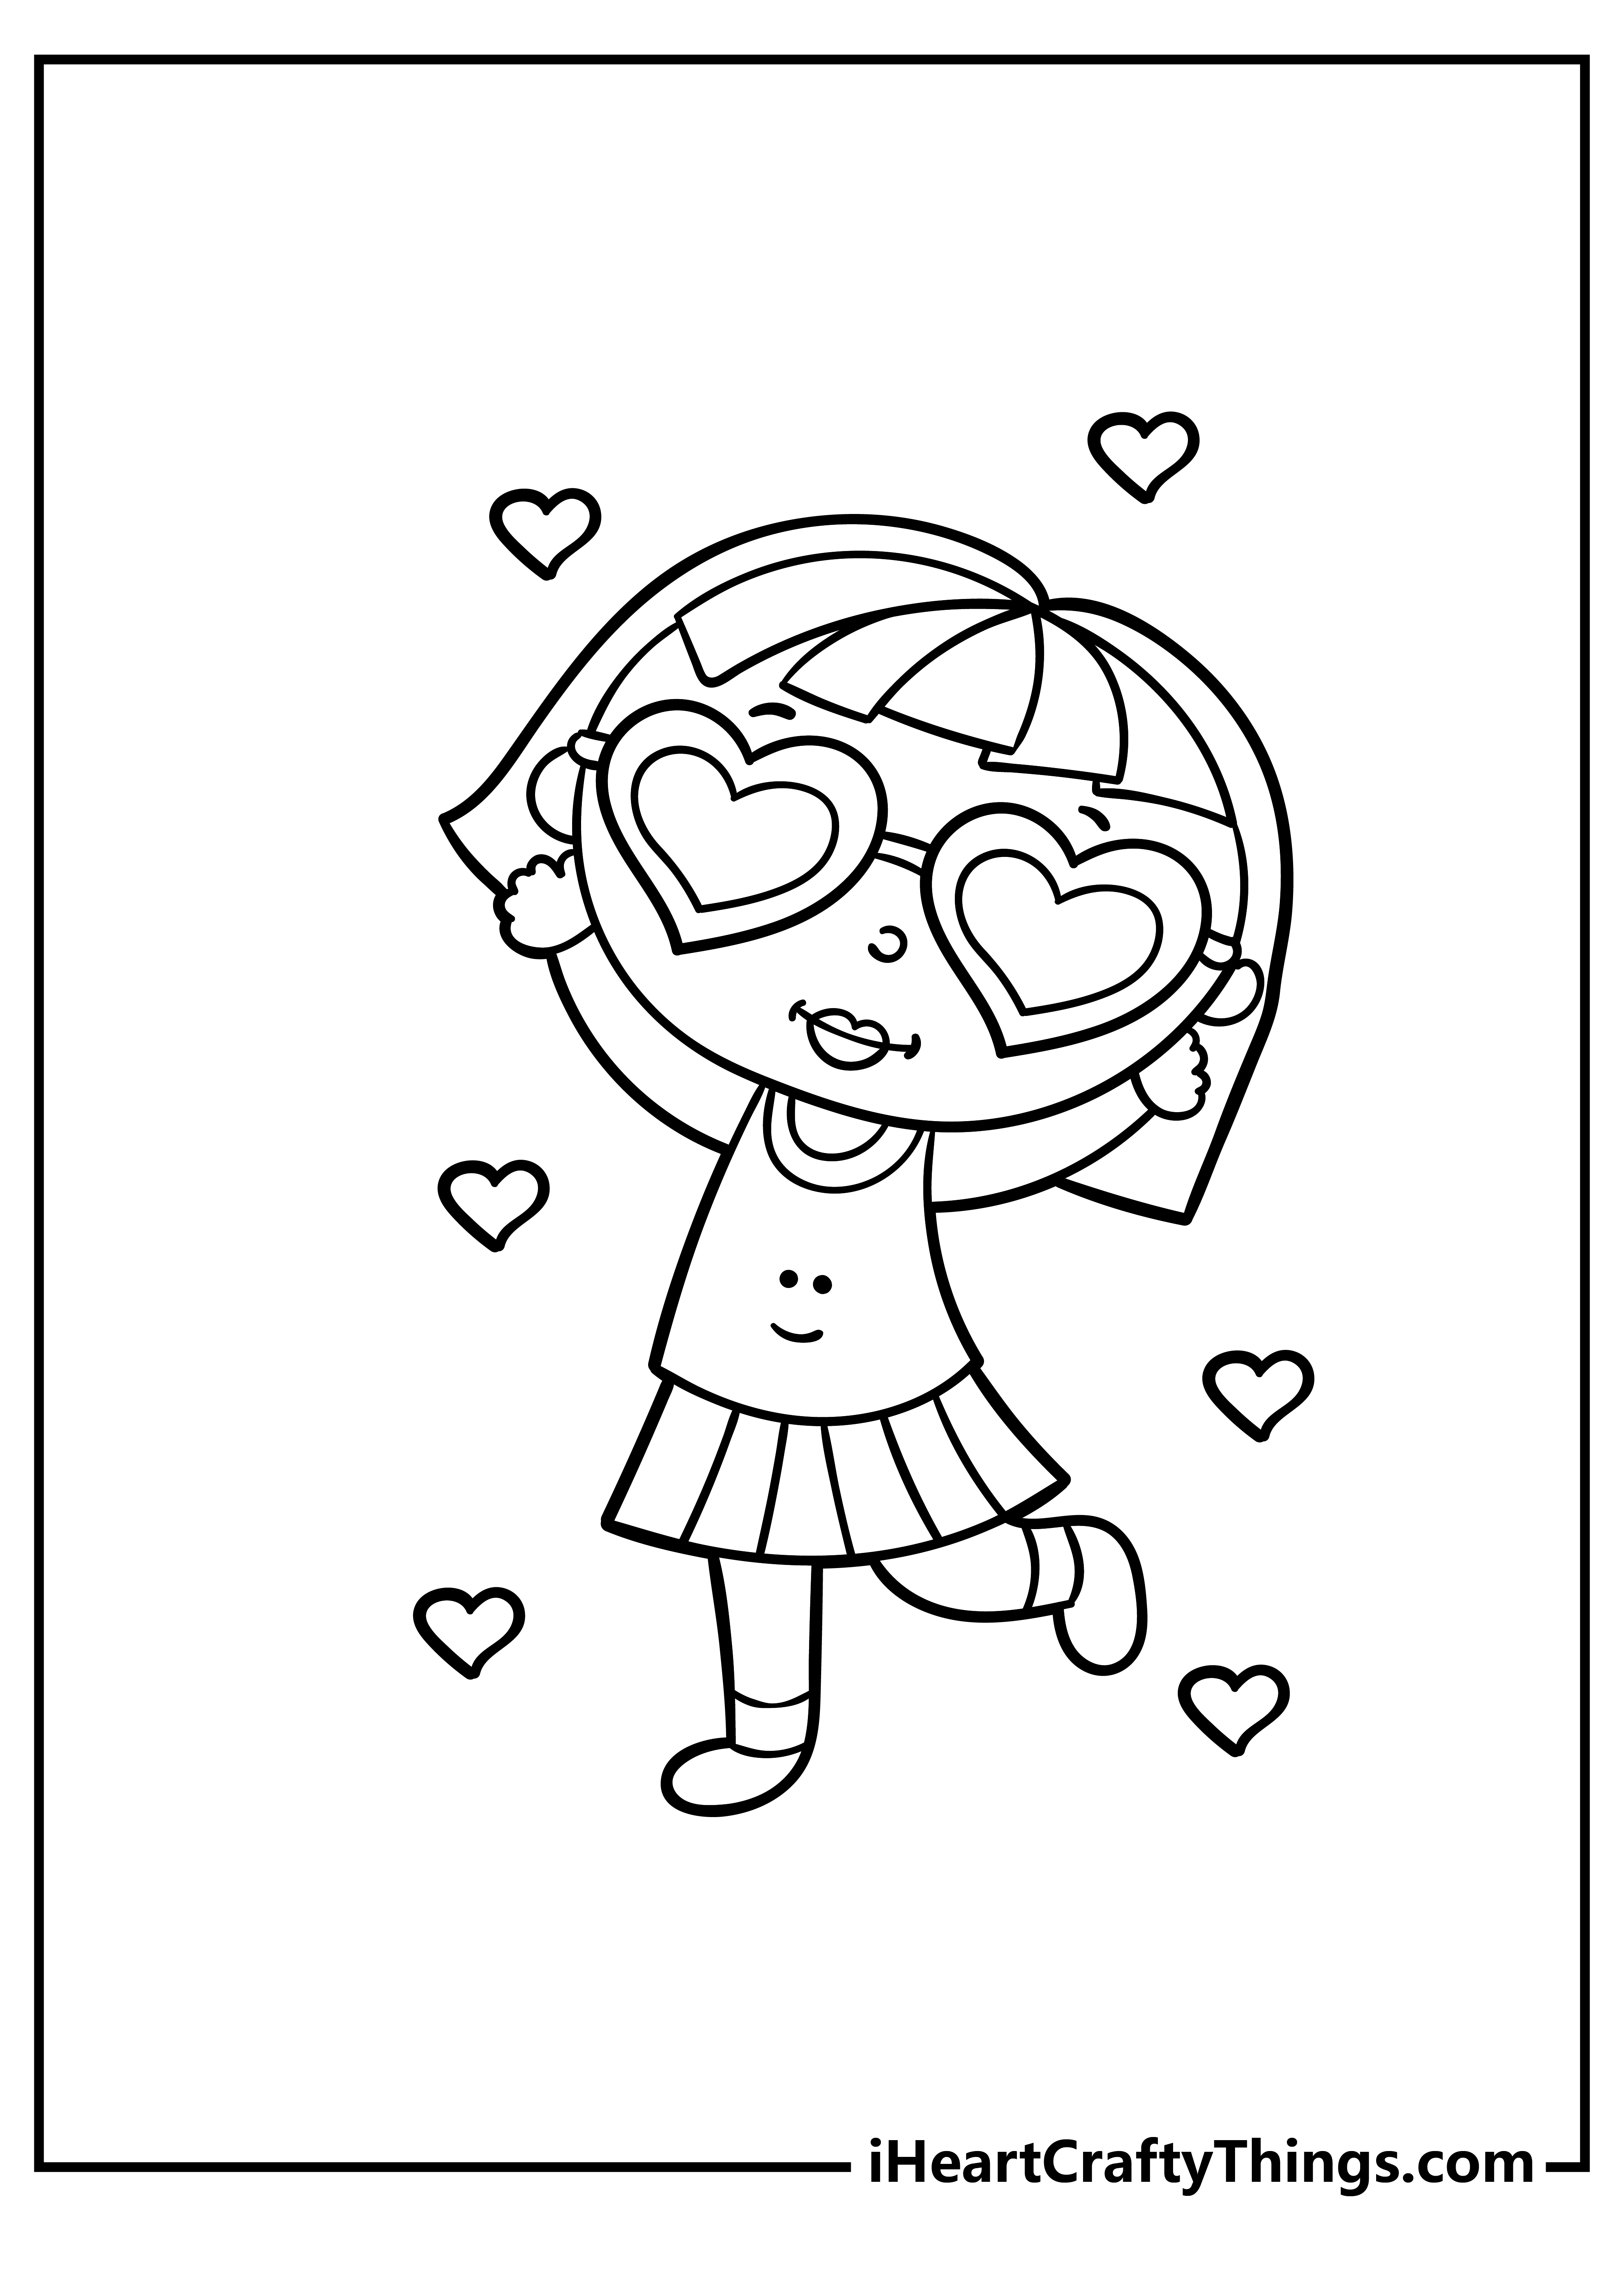 Coloring Pages For Girls free pdf